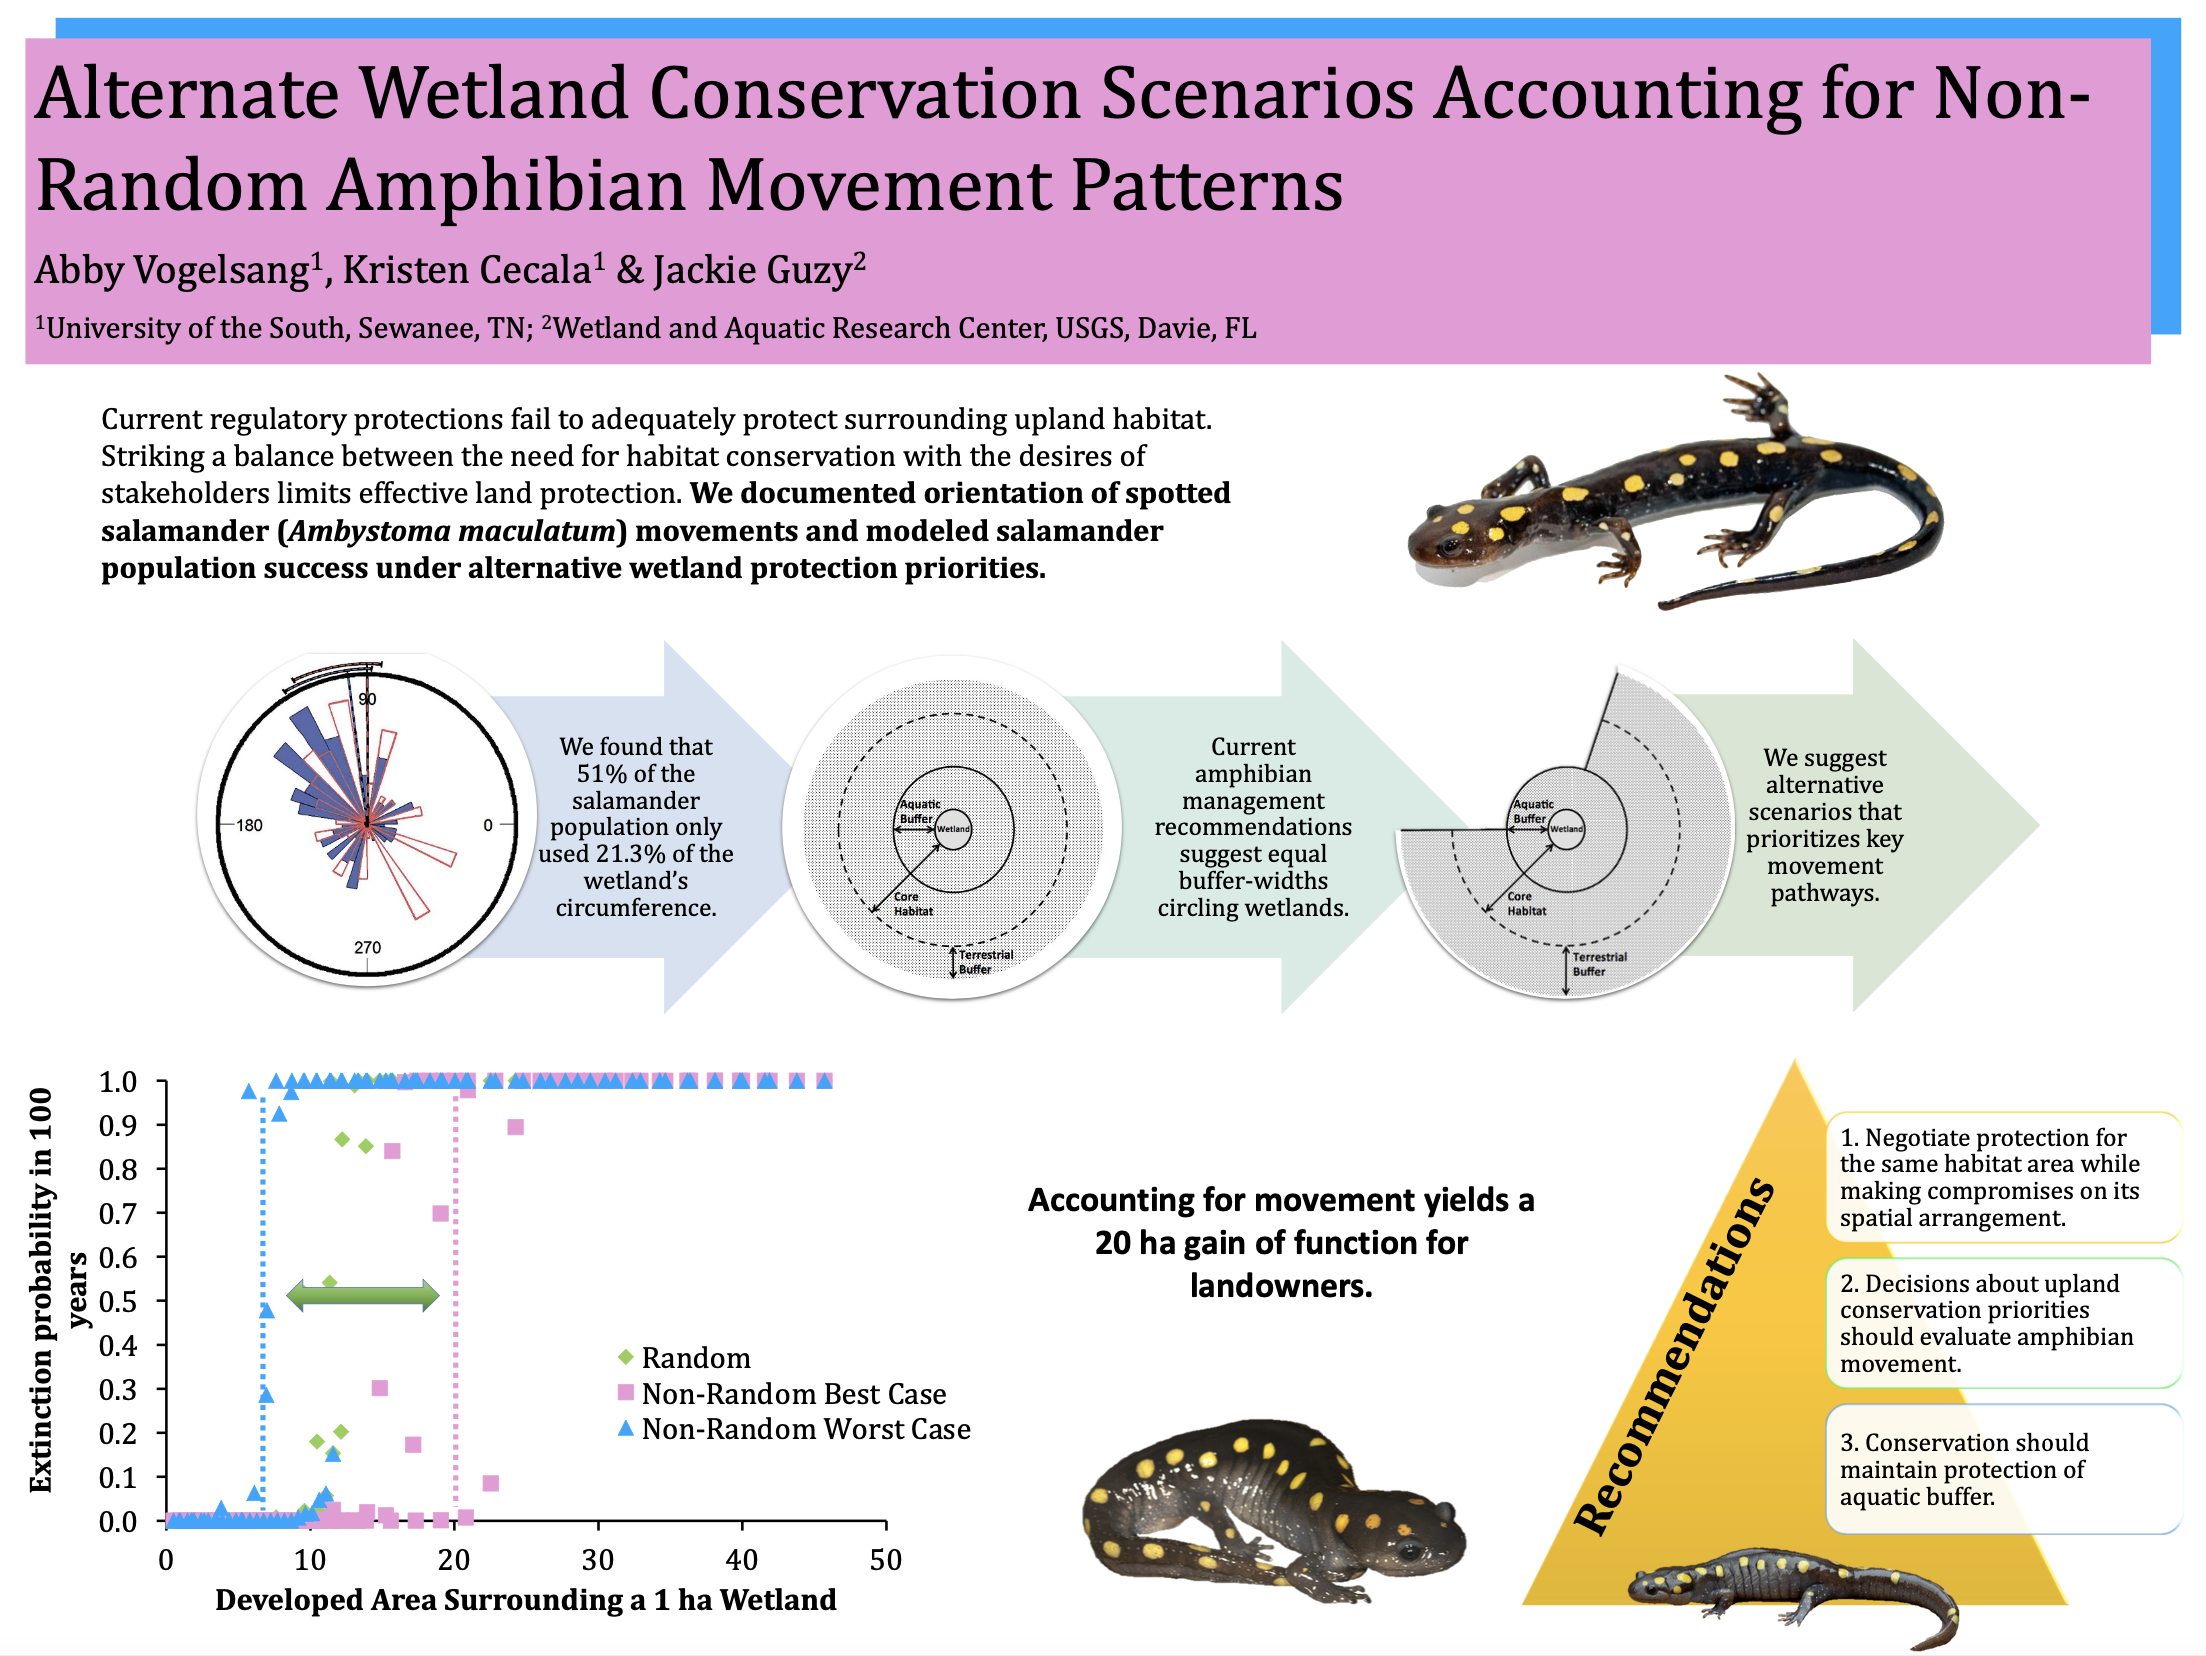 Showcase Image for Alternate Wetland Conservation Scenarios Accounting for Non-Random Amphibian Movement Patterns